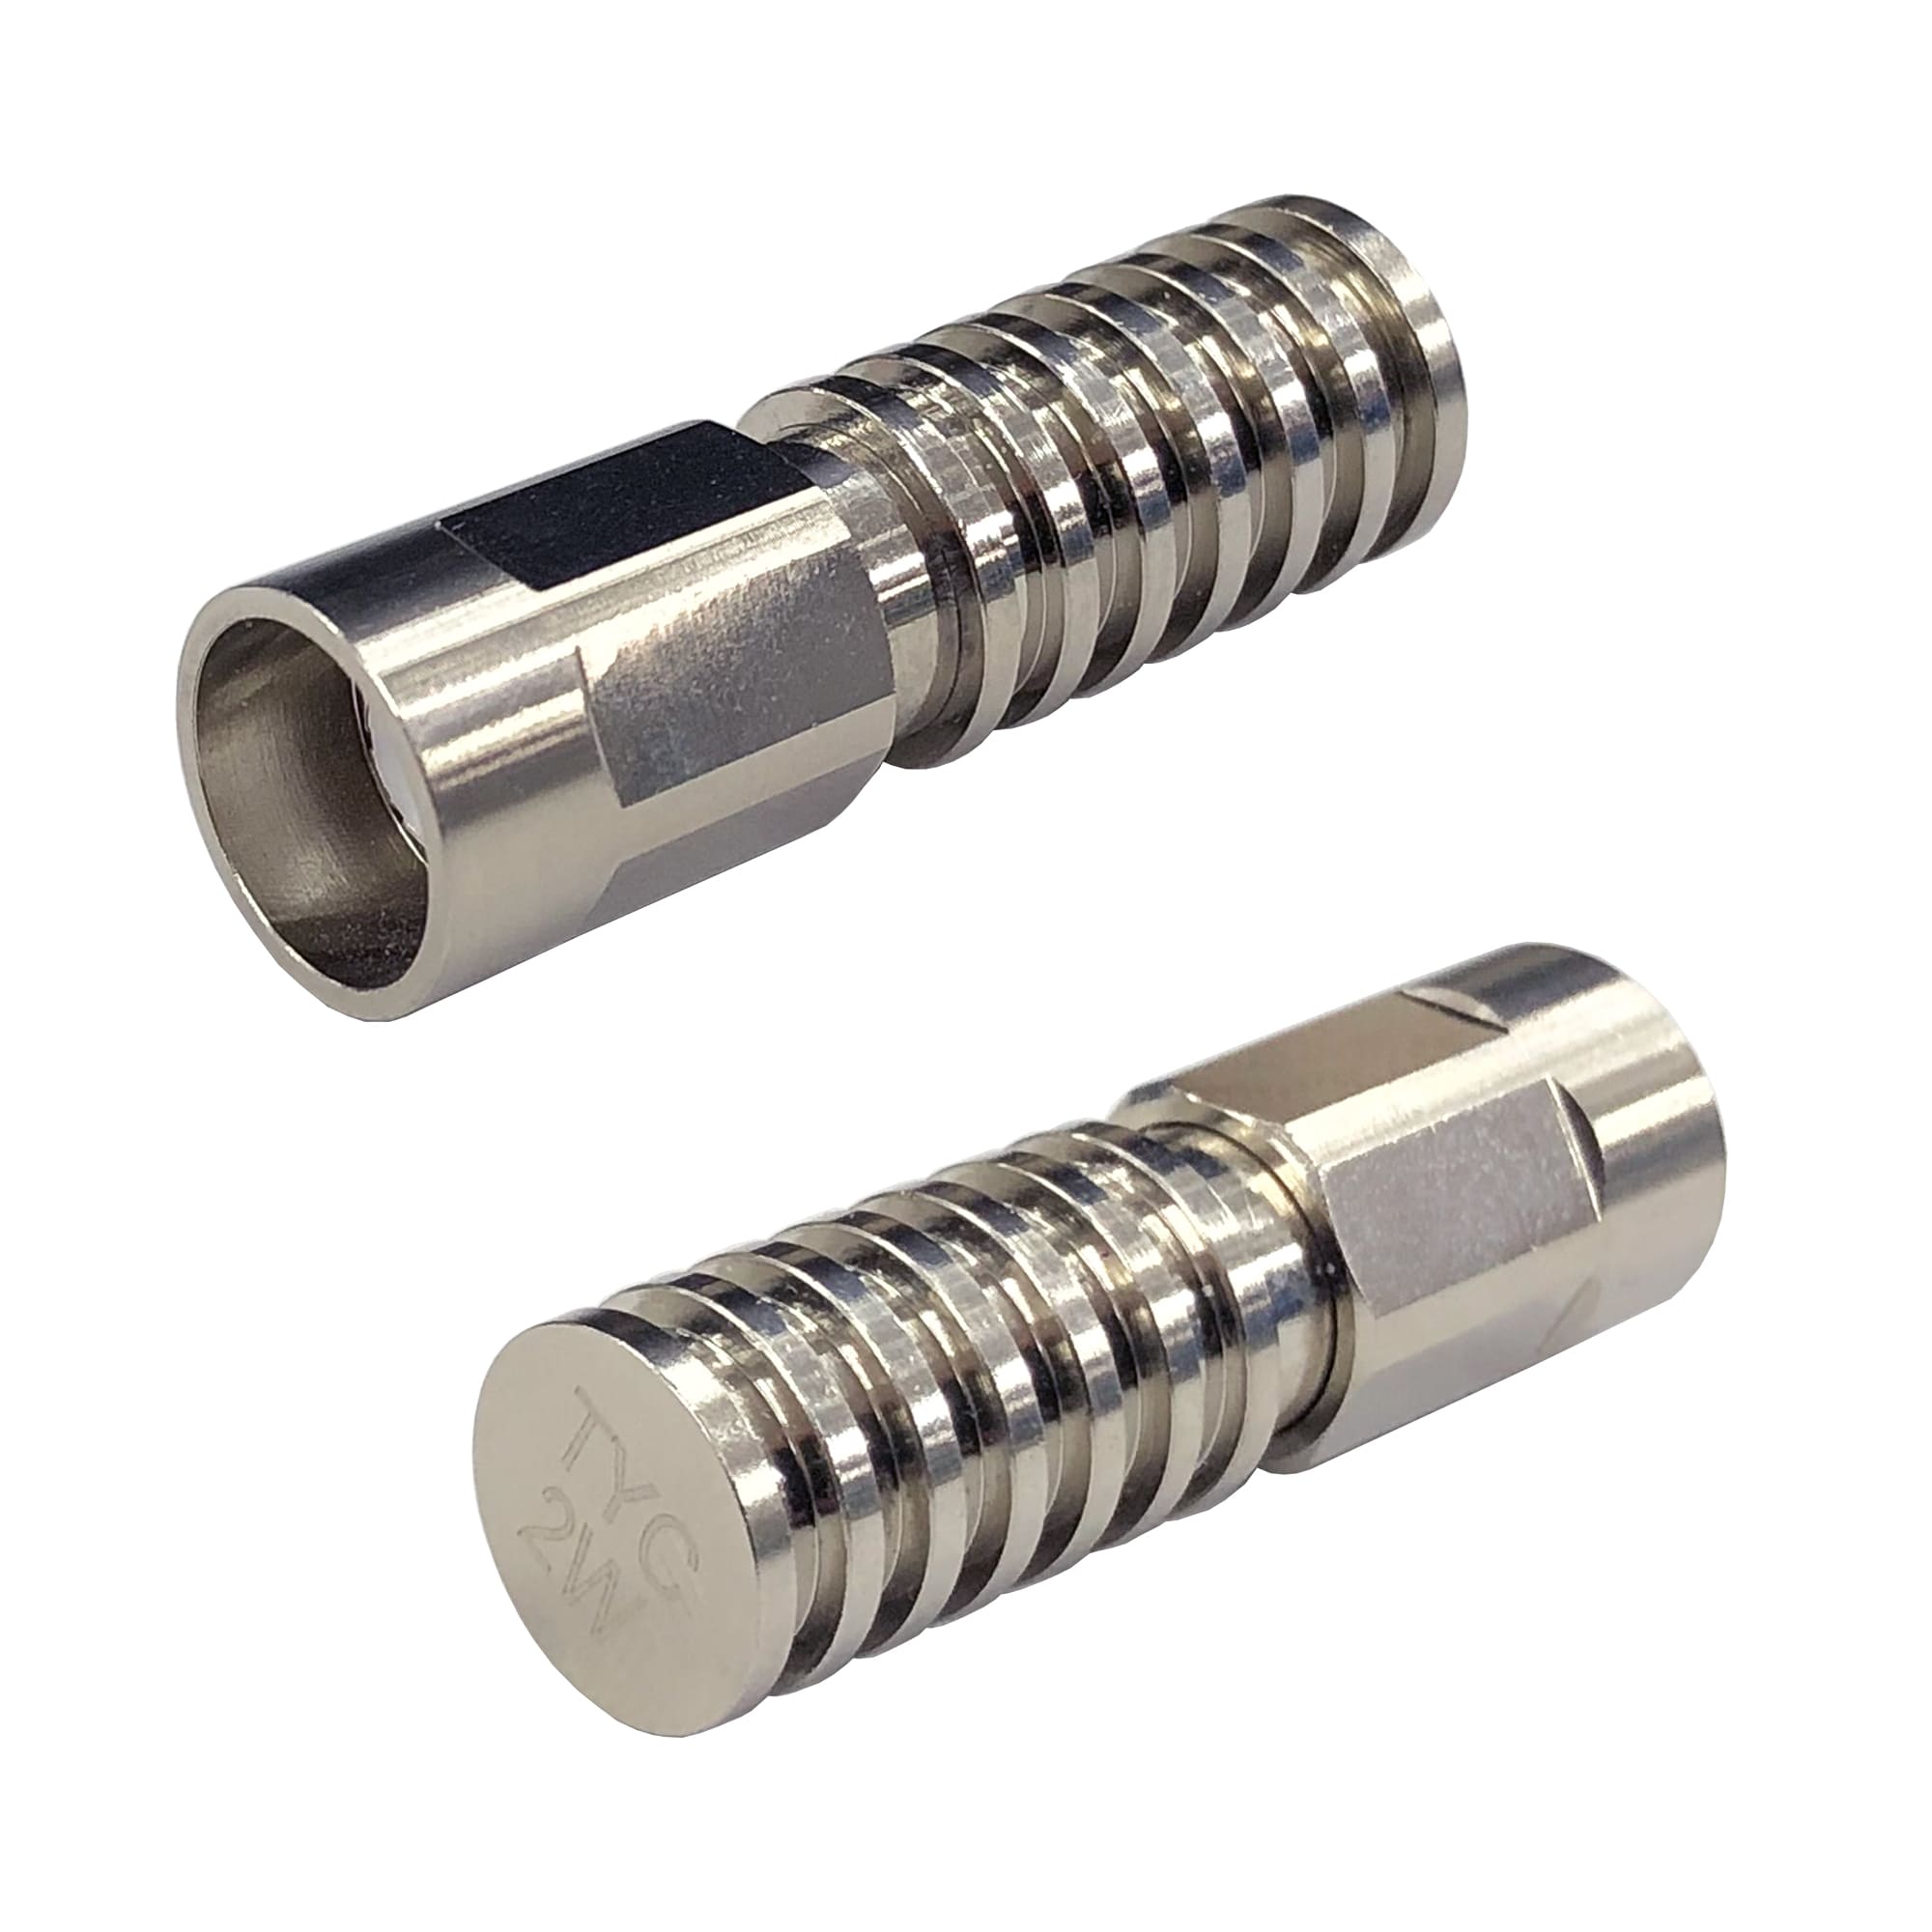 NXT Connector Terminator Plugs (male)